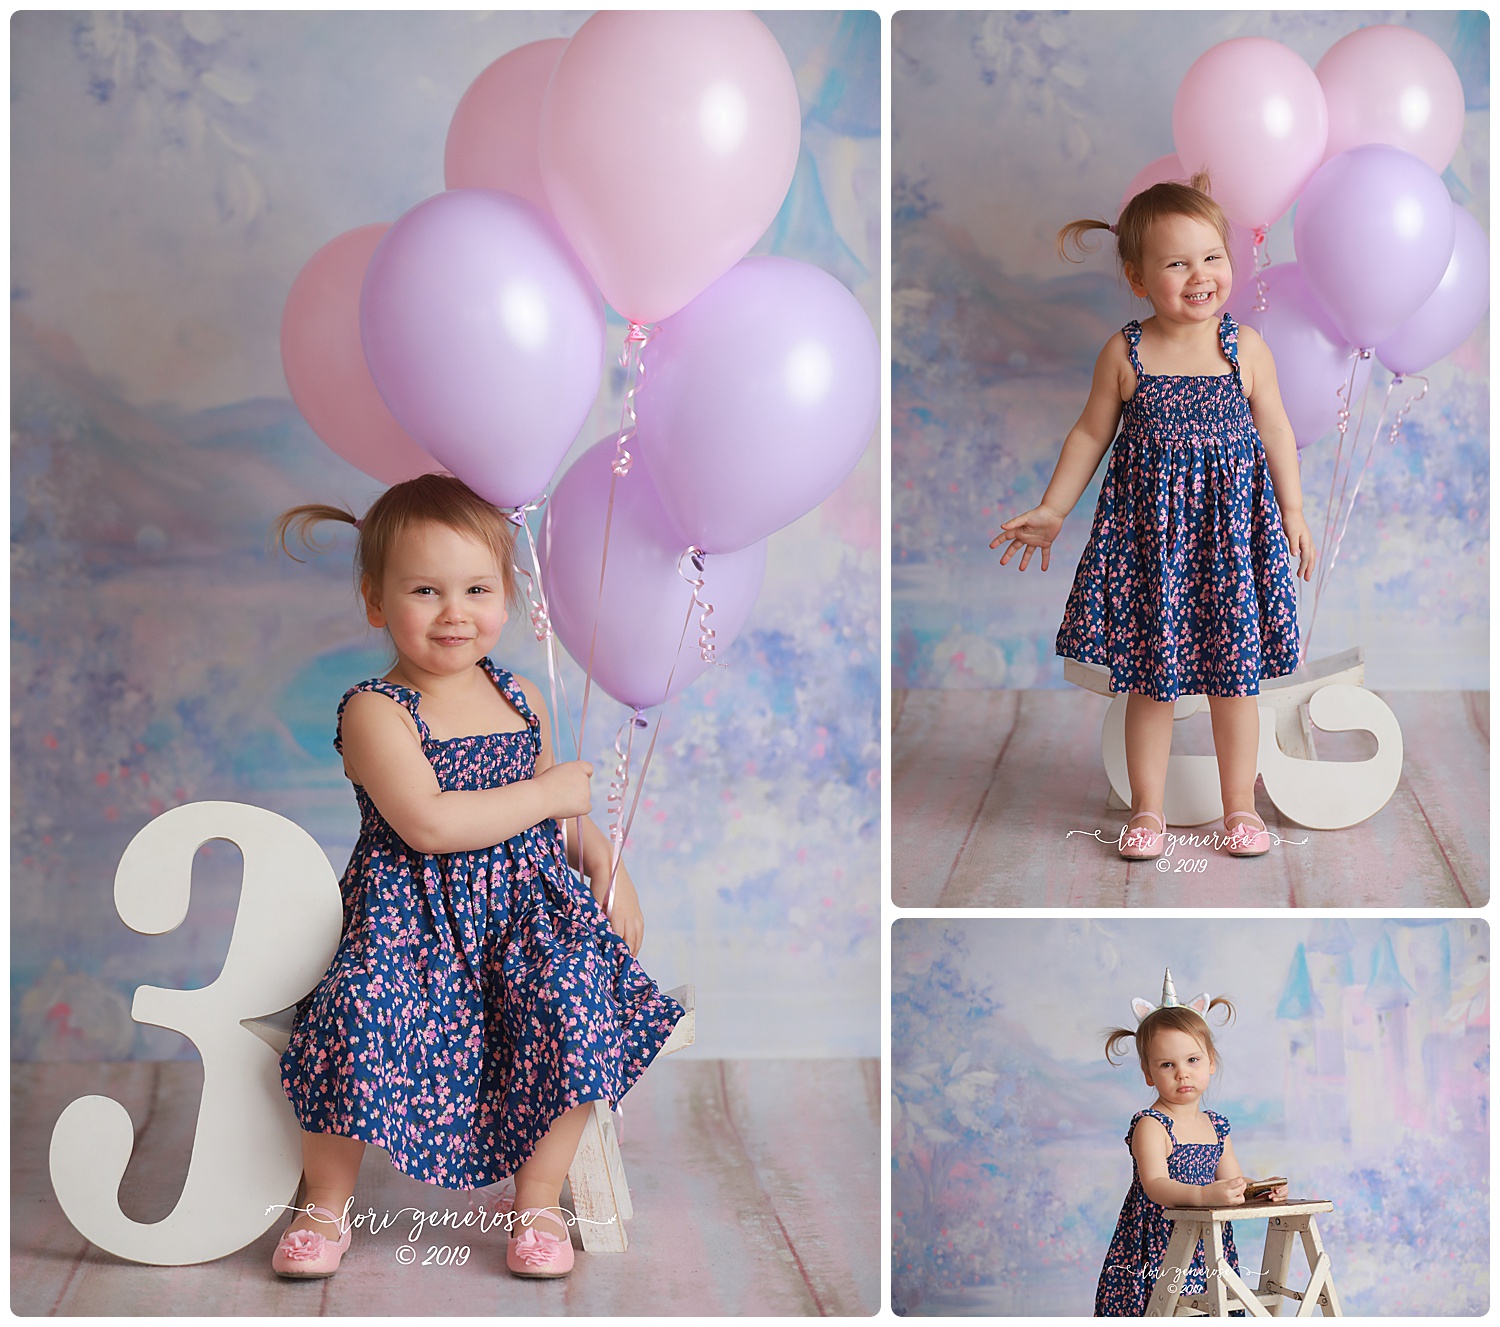 Claire is as happy as can be! She loved playing with her balloons and running away from my camera Happy 3 years little lady 